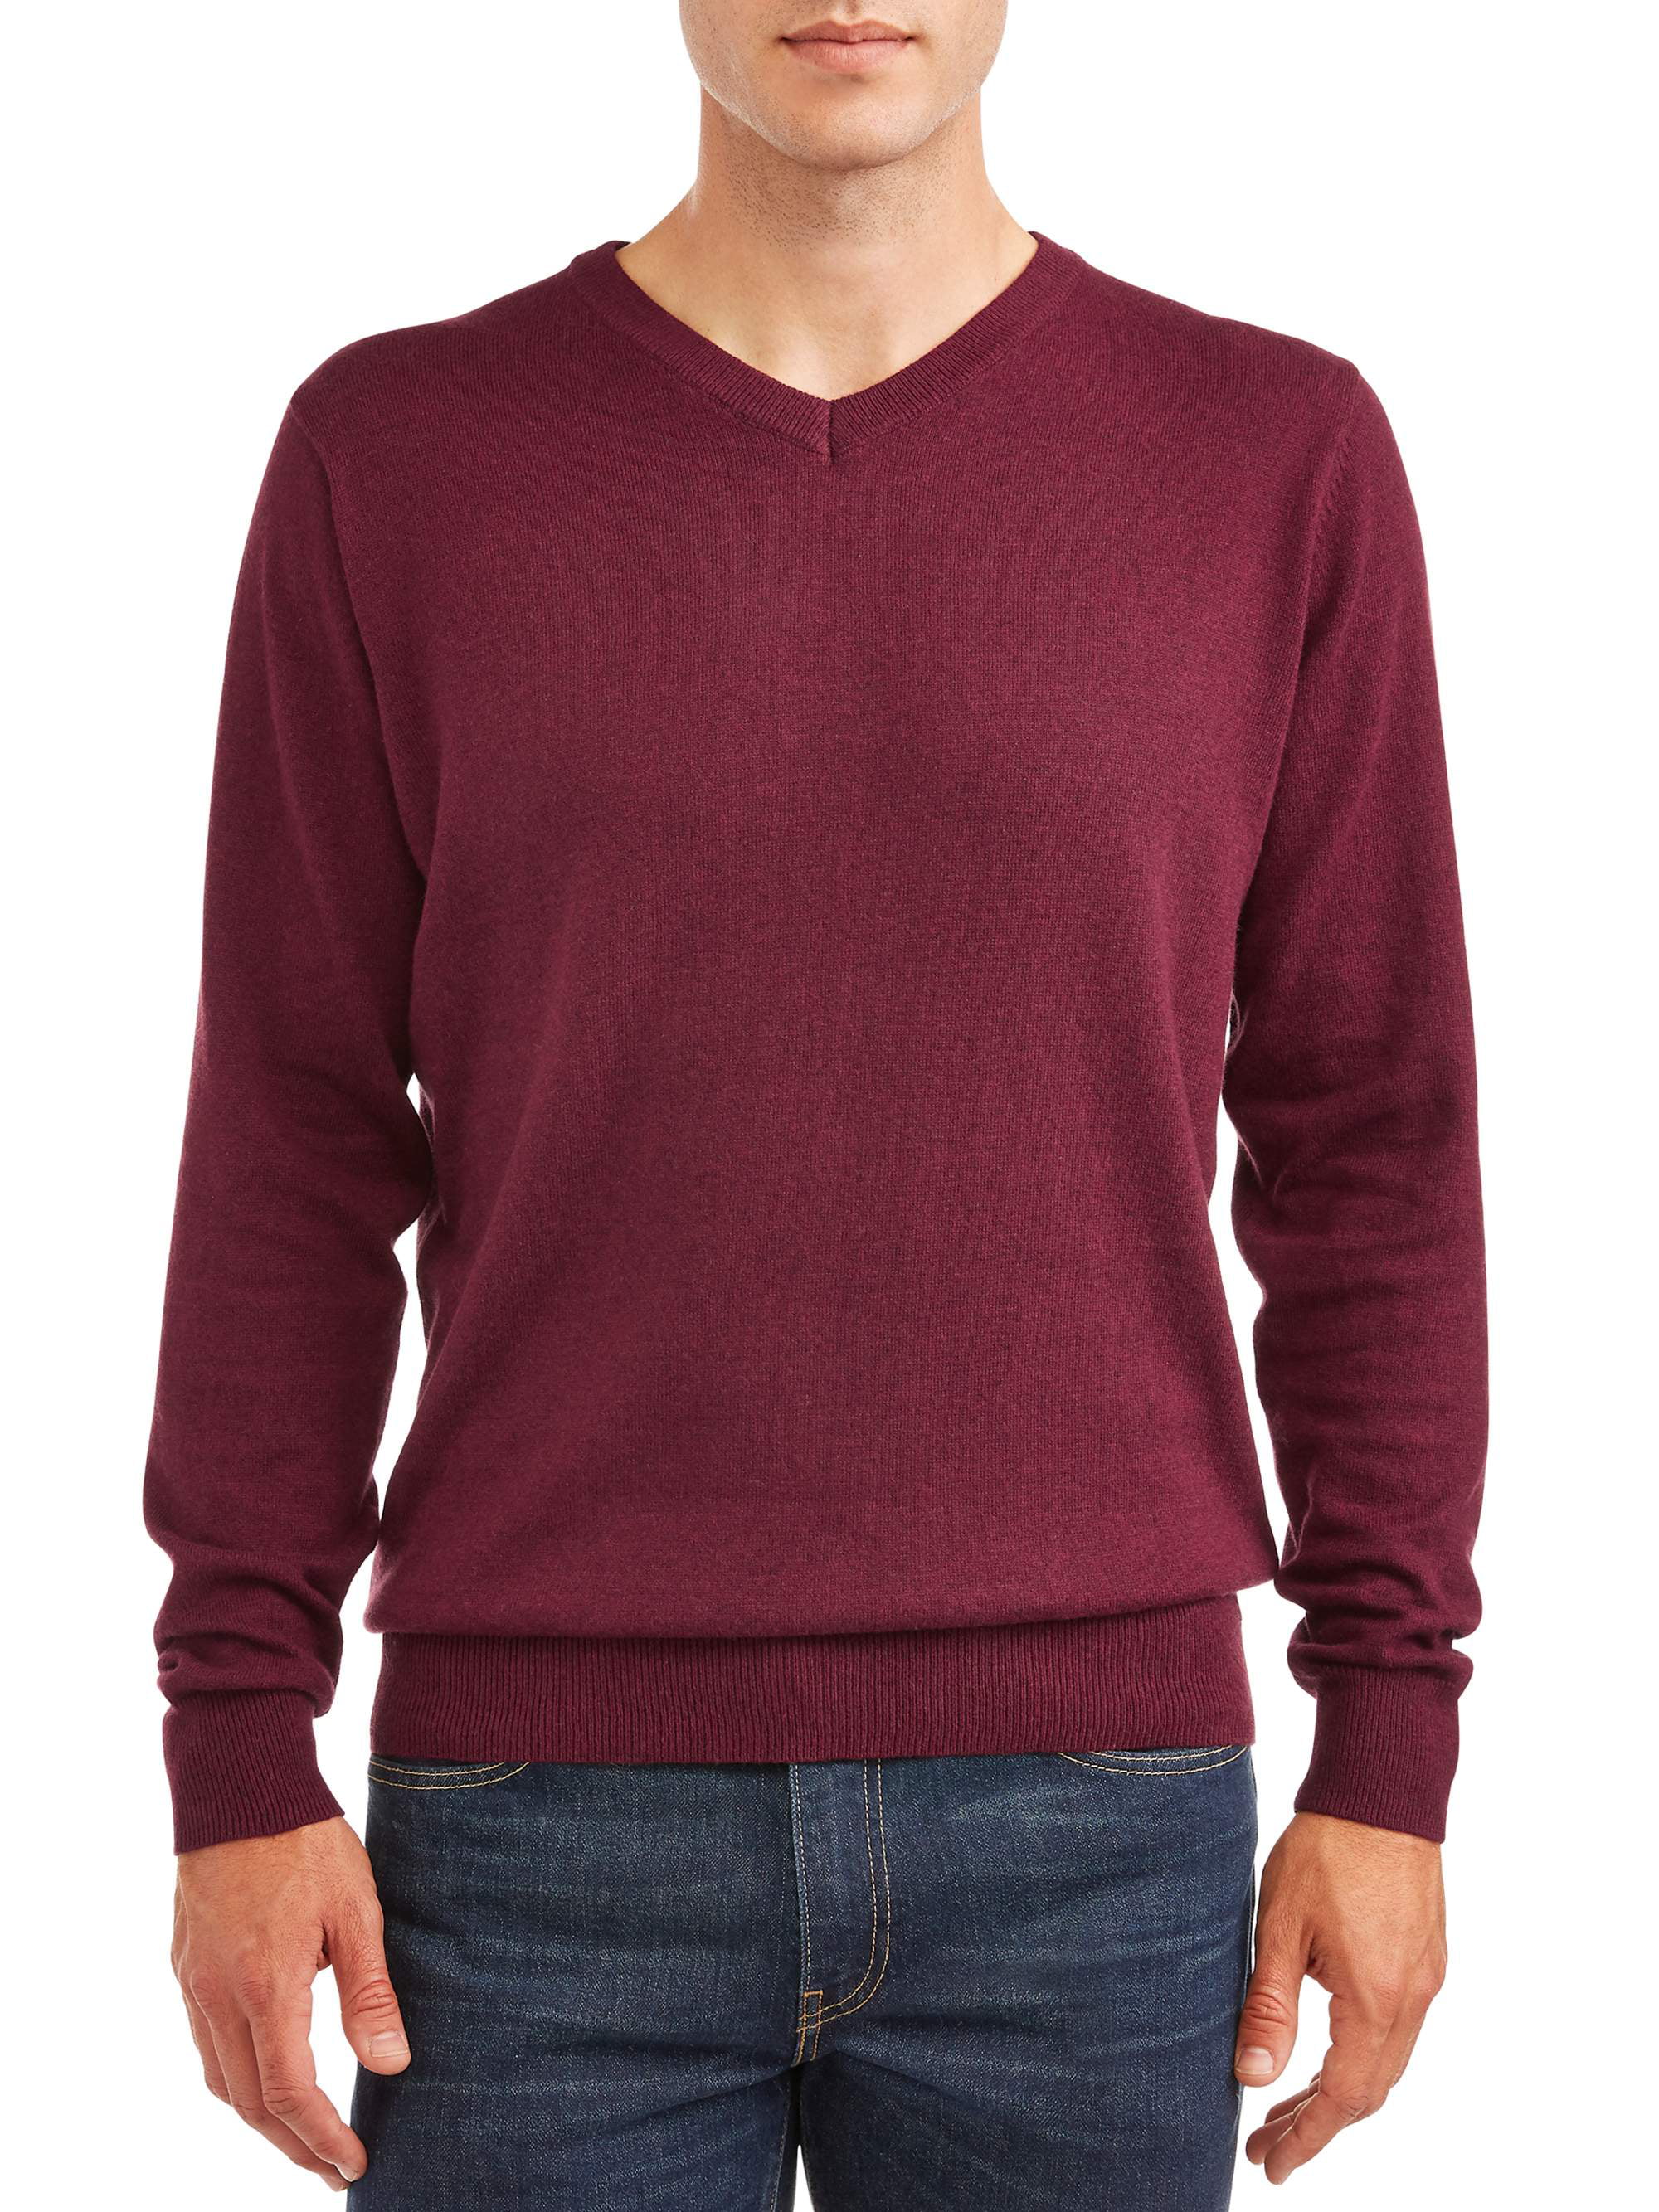 George Men's and Big Men's V-neck Cashmere Sweater, up to Size 3XL ...